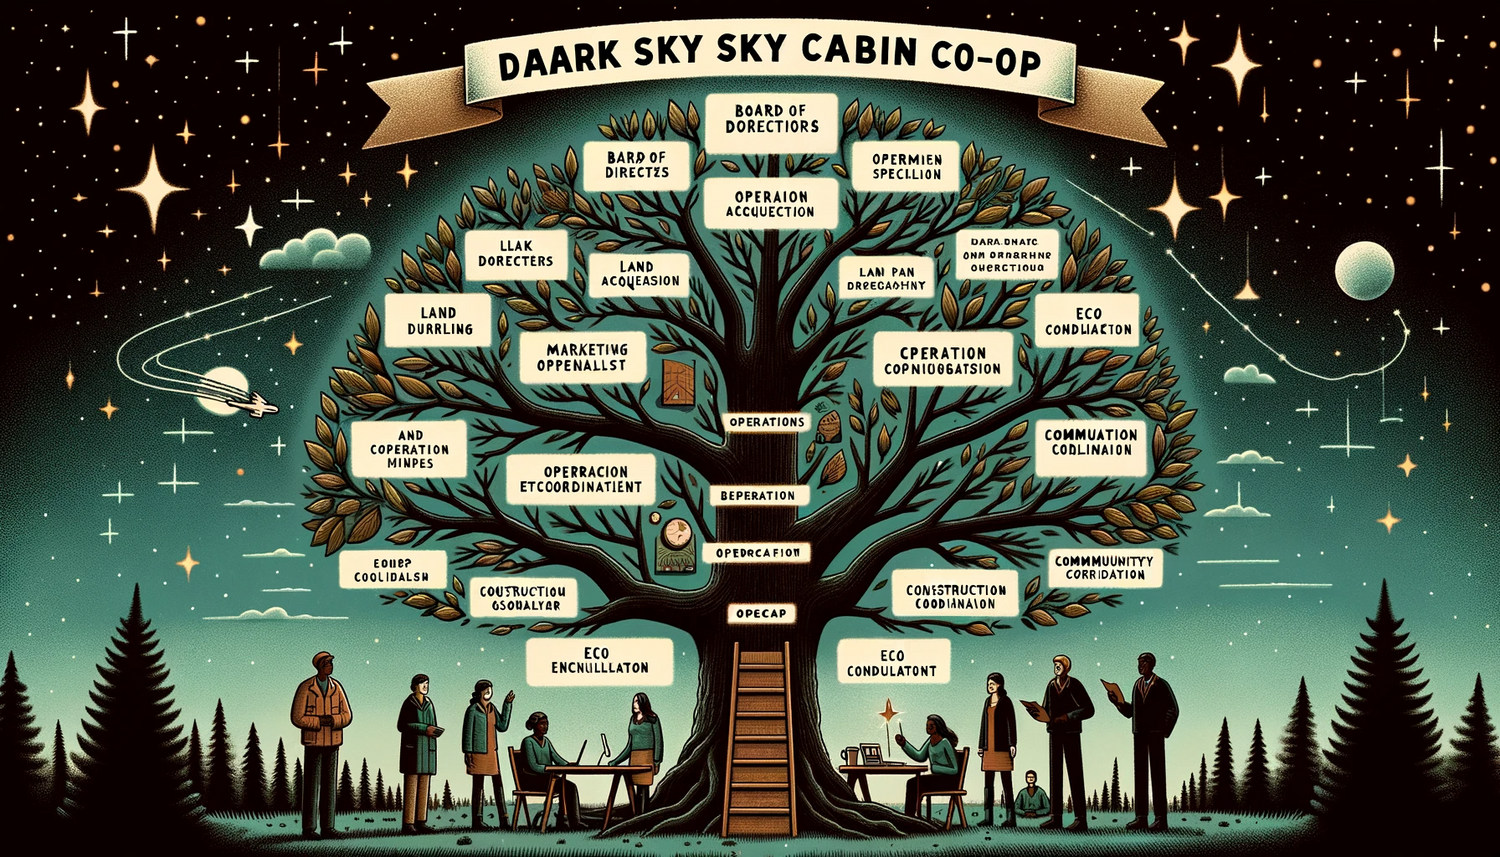  Illustration depicting a stylized organizational tree for 'DAARK SKY CABIN CO-OP,' with branches representing different departments such as board of directors and operations, set against a starry night sky with a shooting star, moon, and forest silhouette.